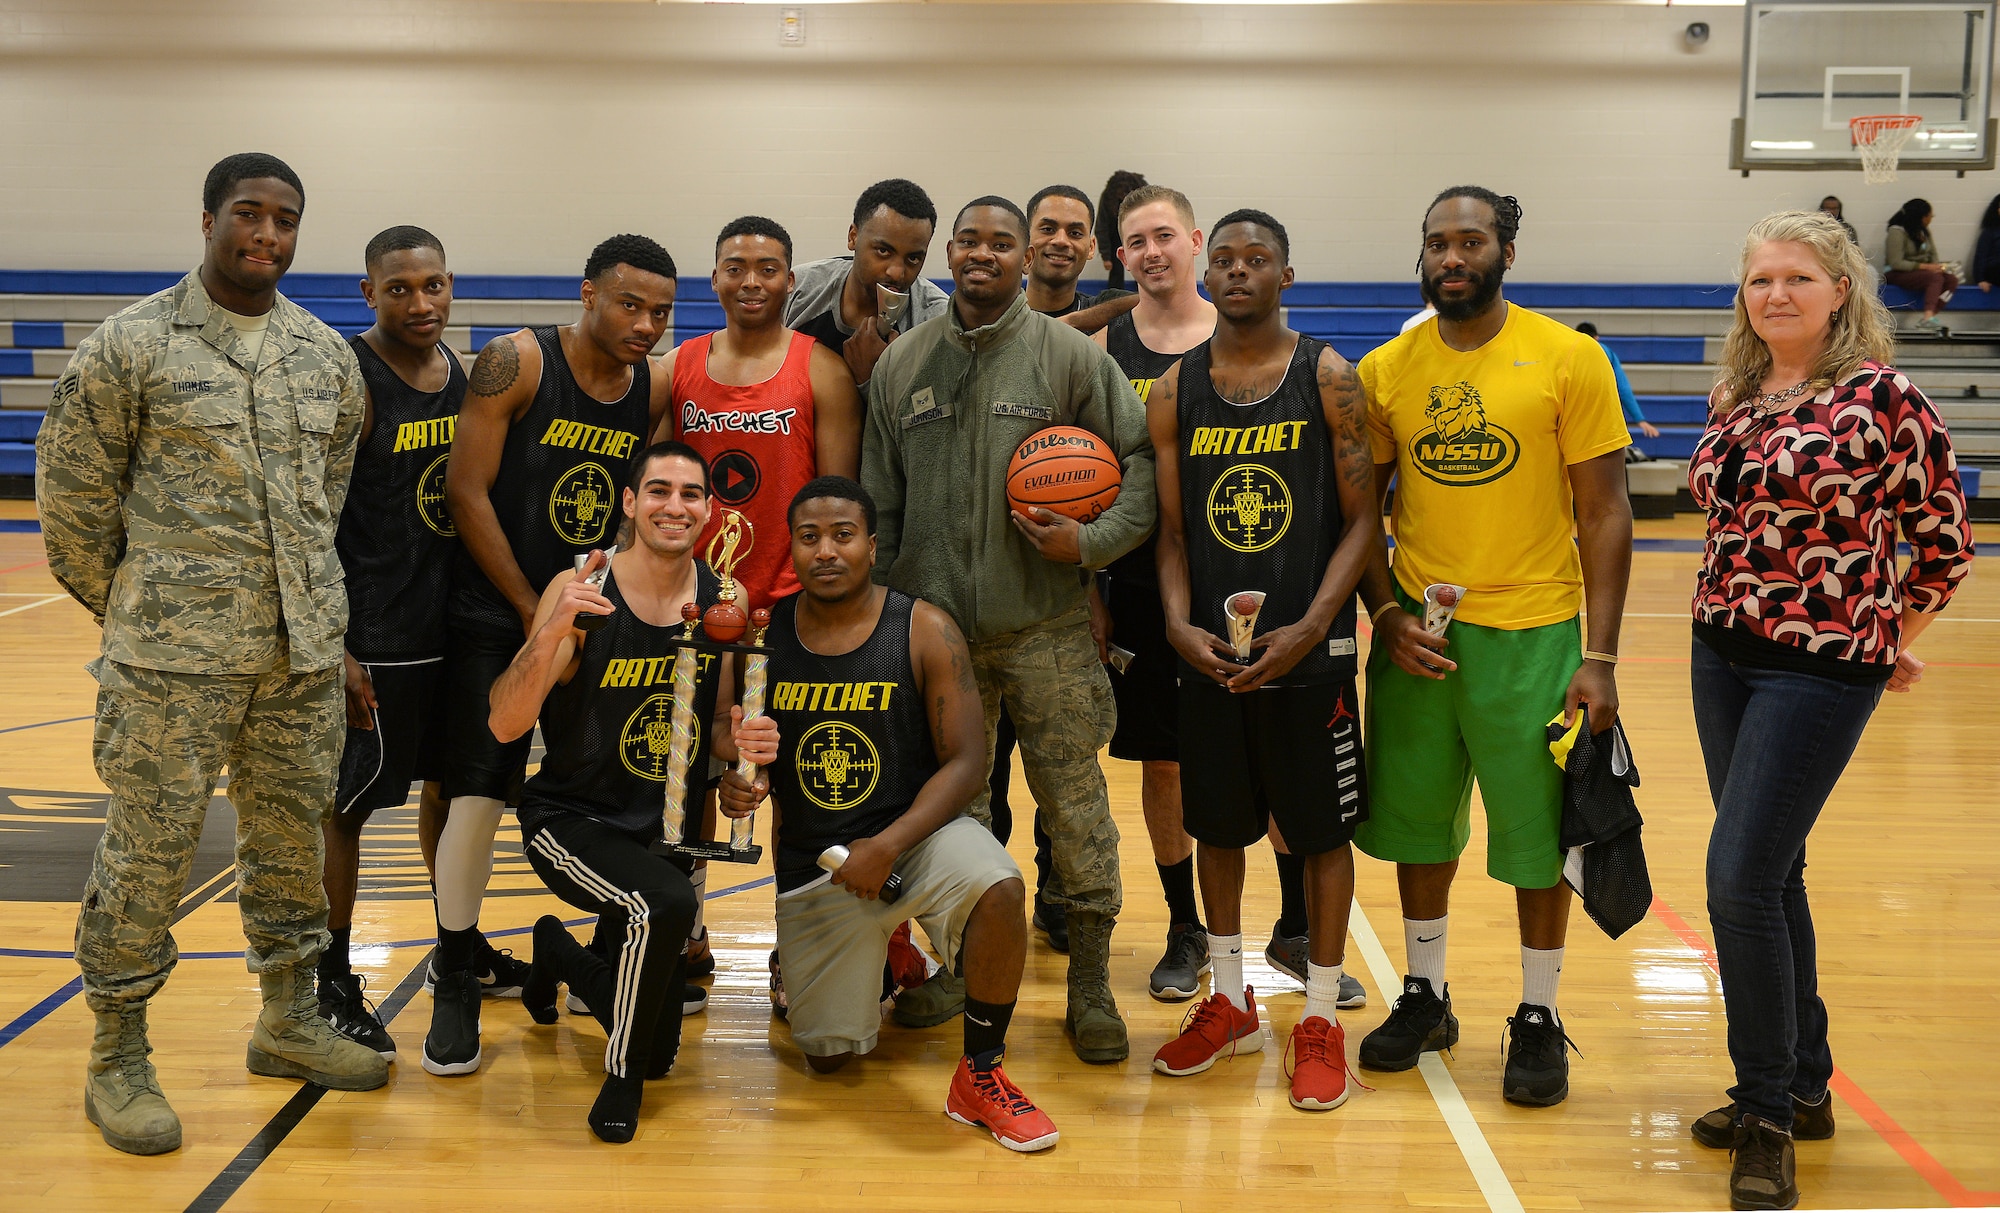 The 22nd Maintenance Operations, “Team Ratchet” intramural basketball team pose with the 2015-2016 intramural basketball championship trophy, Feb. 25, 2016, at McConnell Air Force Base, Kan. Team Ratchet won the champion with a 37-35 victory over the 22nd Aircraft Maintenance Squadron basketball team. (U.S. Air Force photo/Senior Airman Colby L. Hardin)